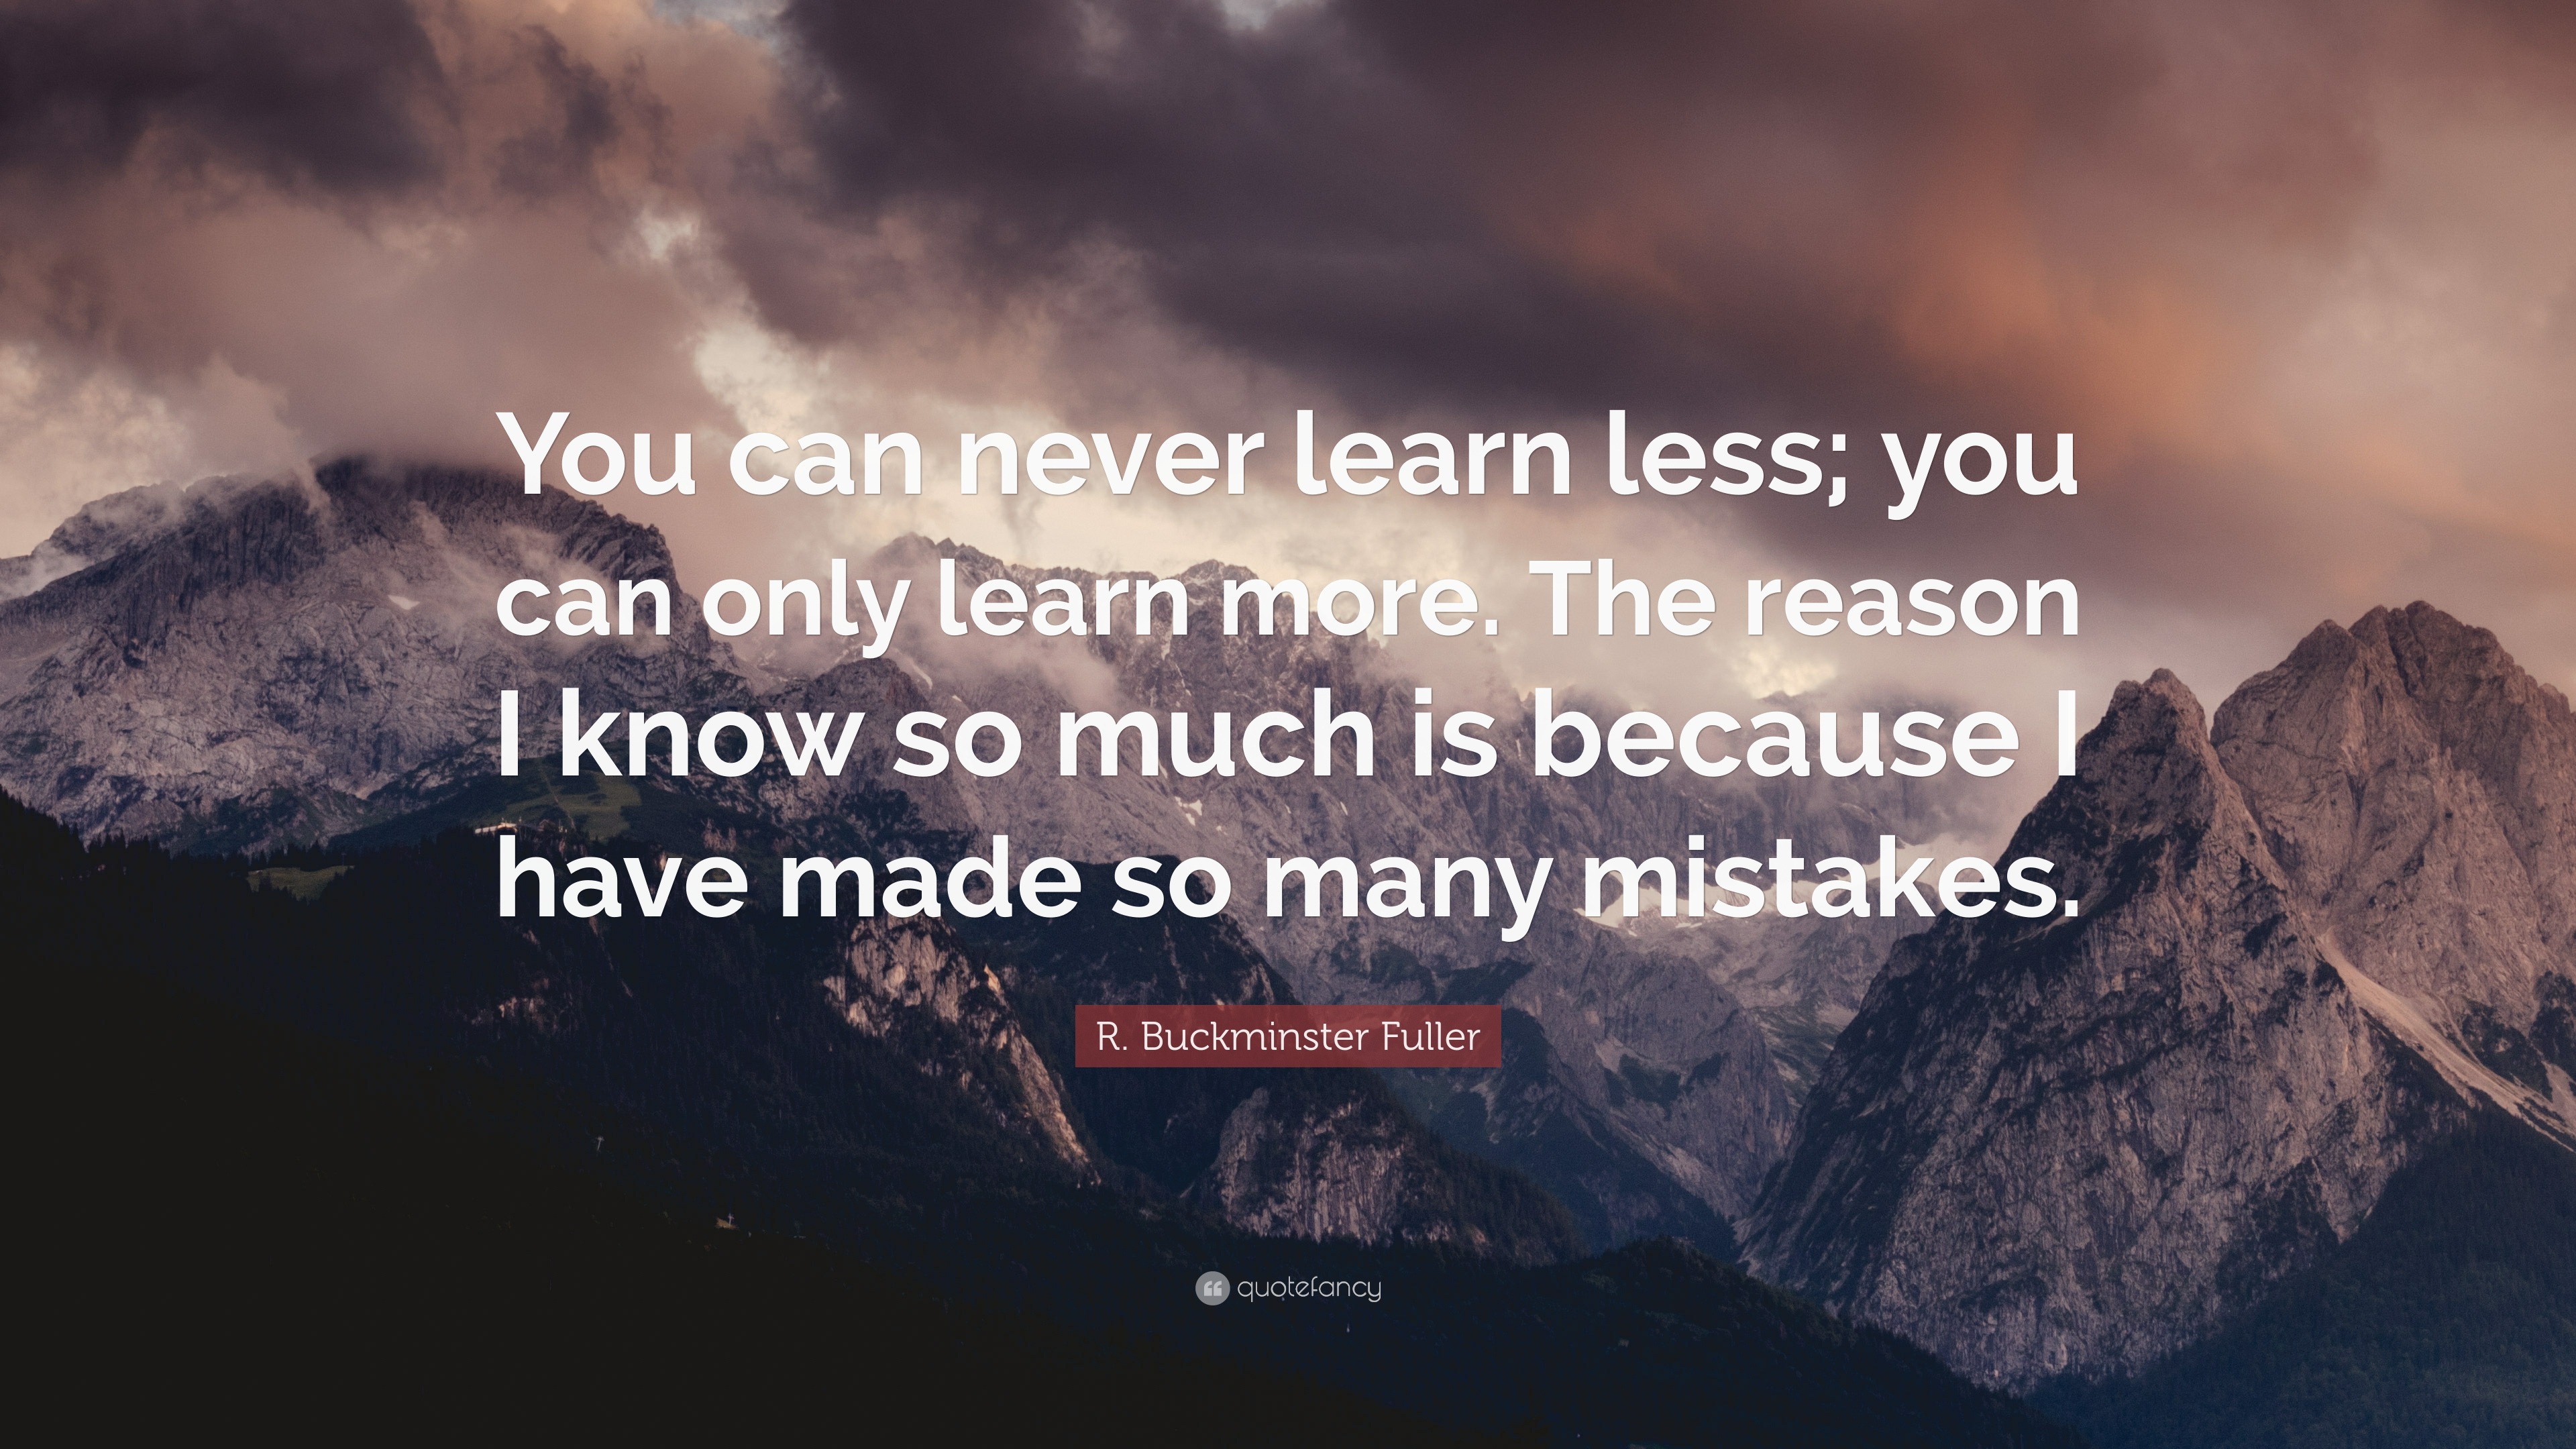 R. Buckminster Fuller Quote: “You can never learn less; you can only ...